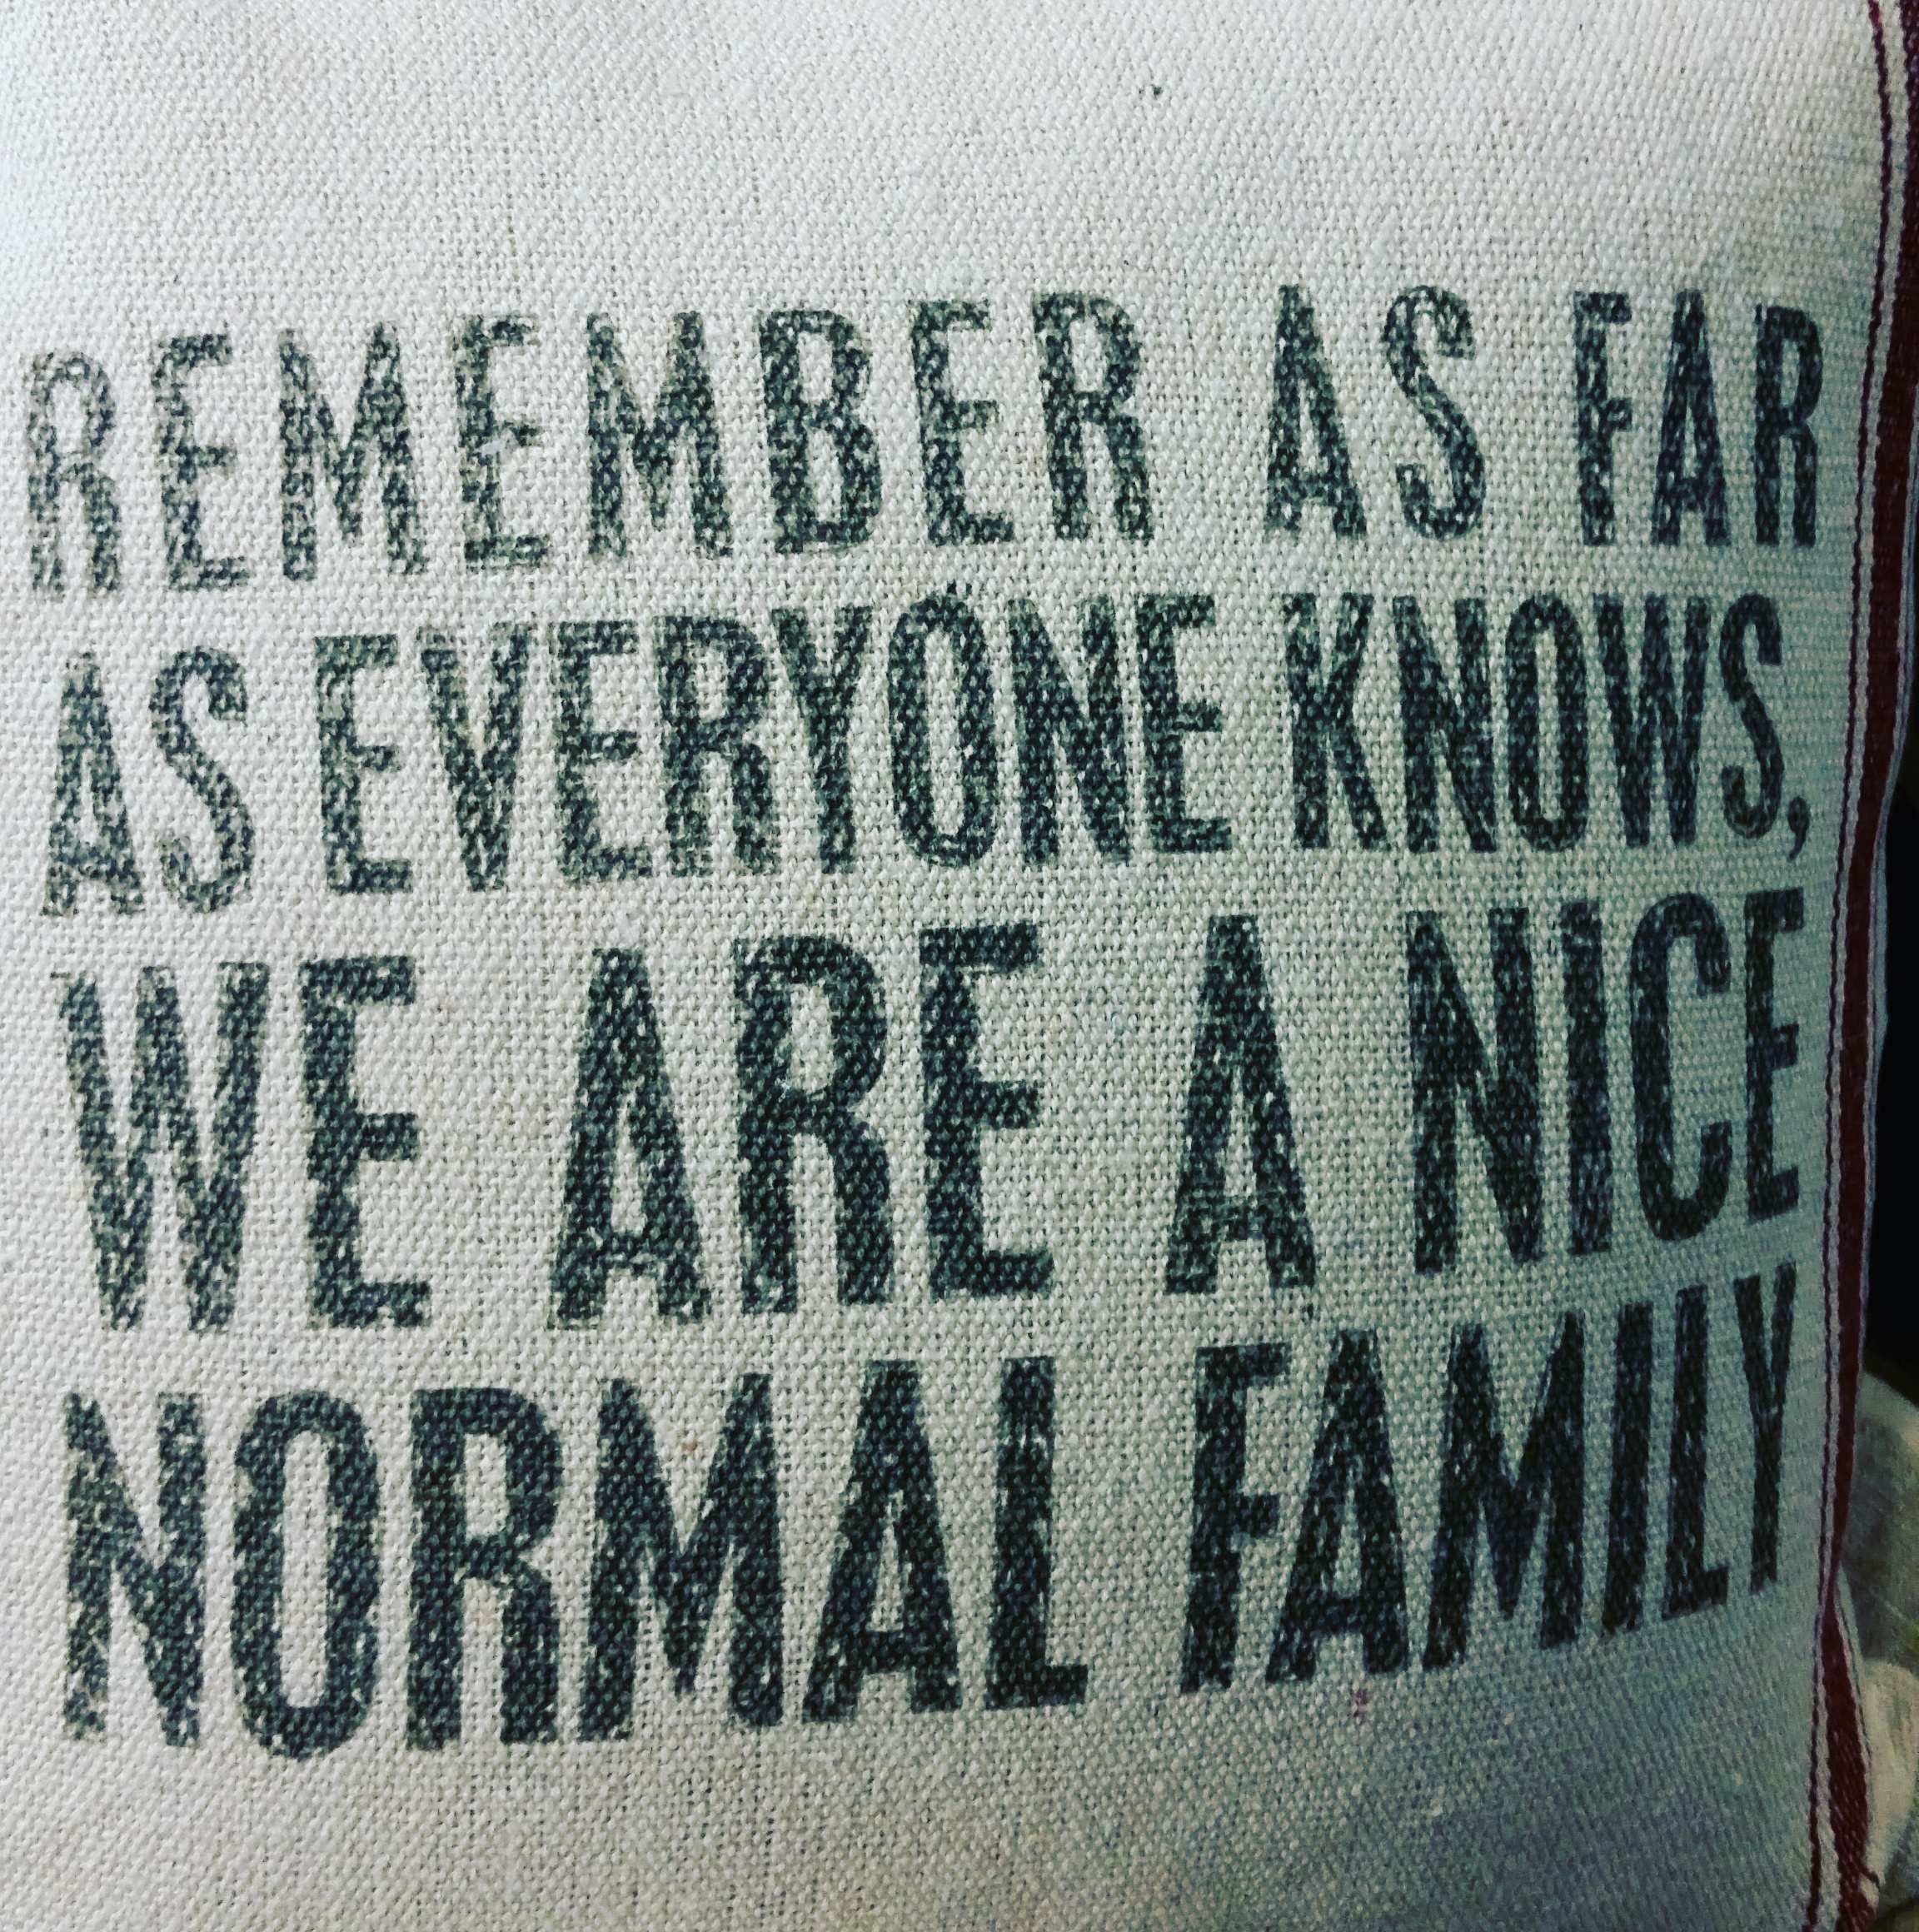 normal family pillow